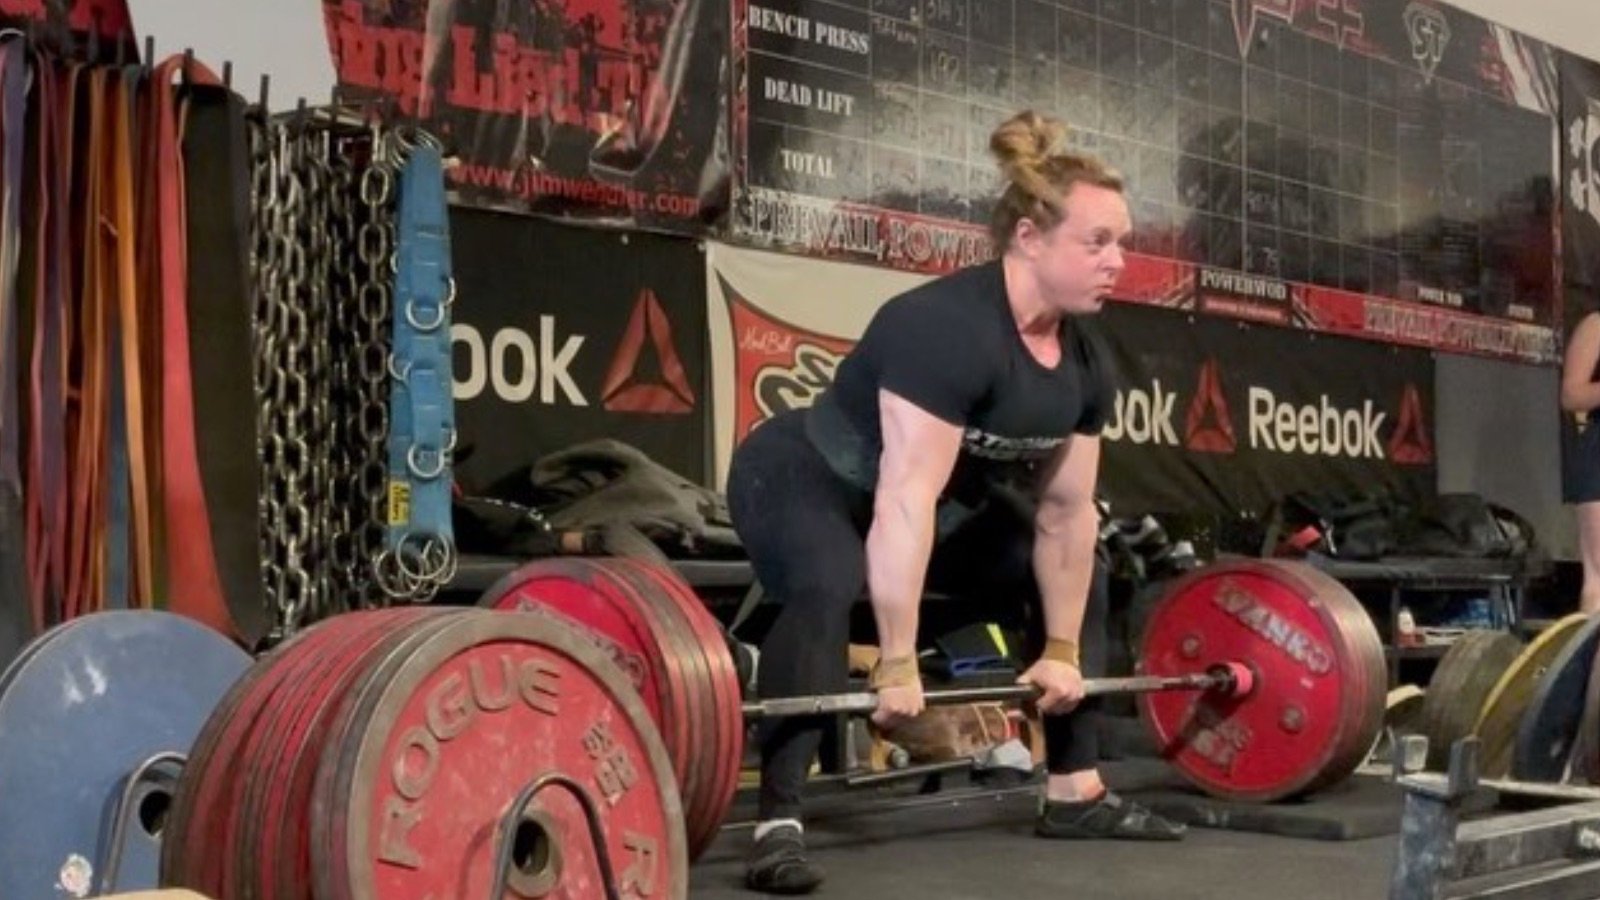 kristy-hawkins-pulls-over-272.1-kilograms-(600-pounds)-with-sumo-deadlift-for-first-time-–-breaking-muscle